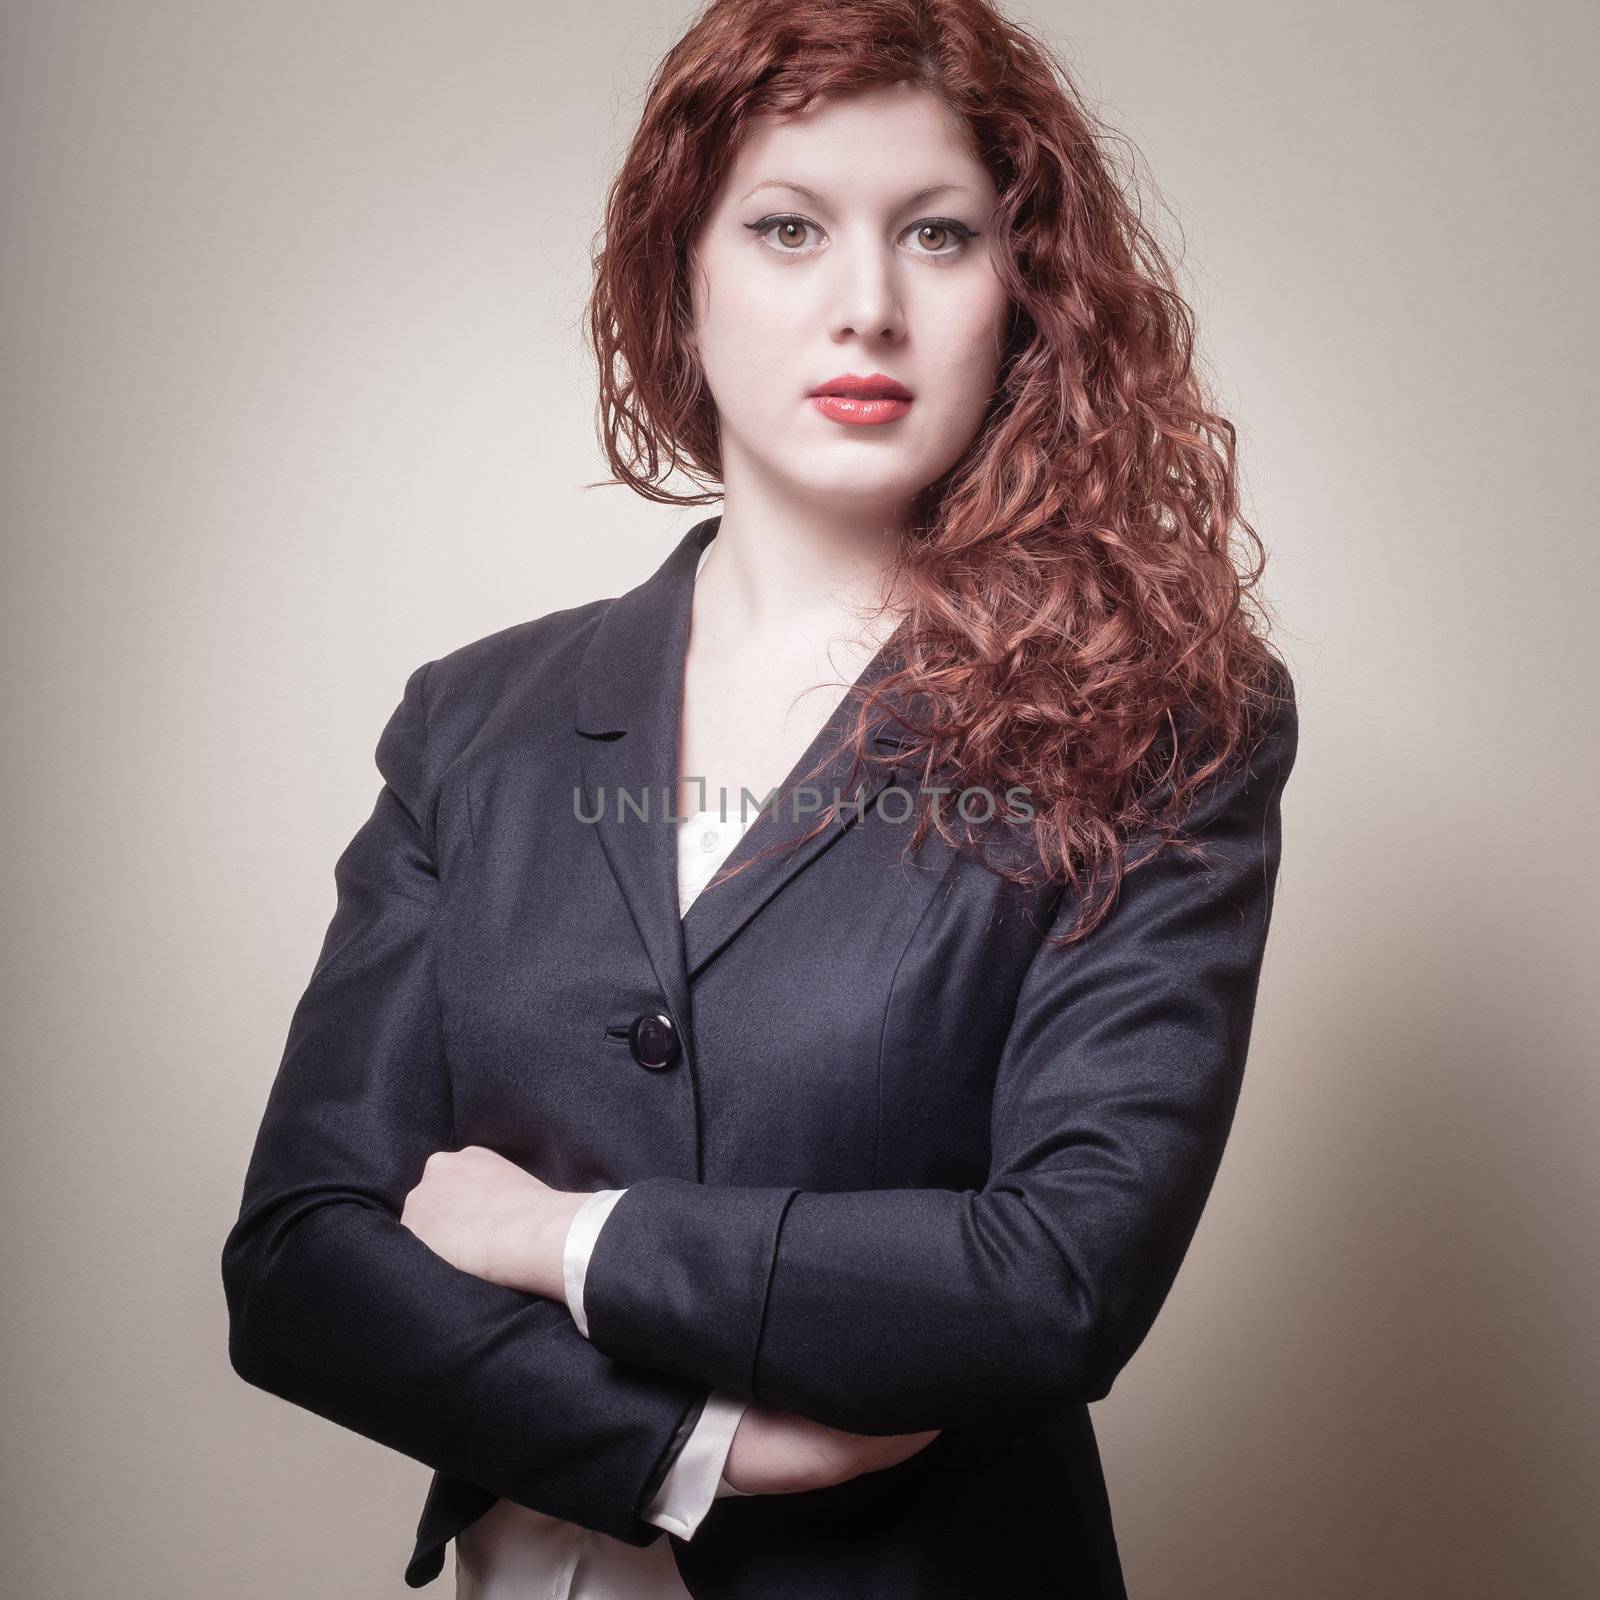 success business long red hair woman on gray background